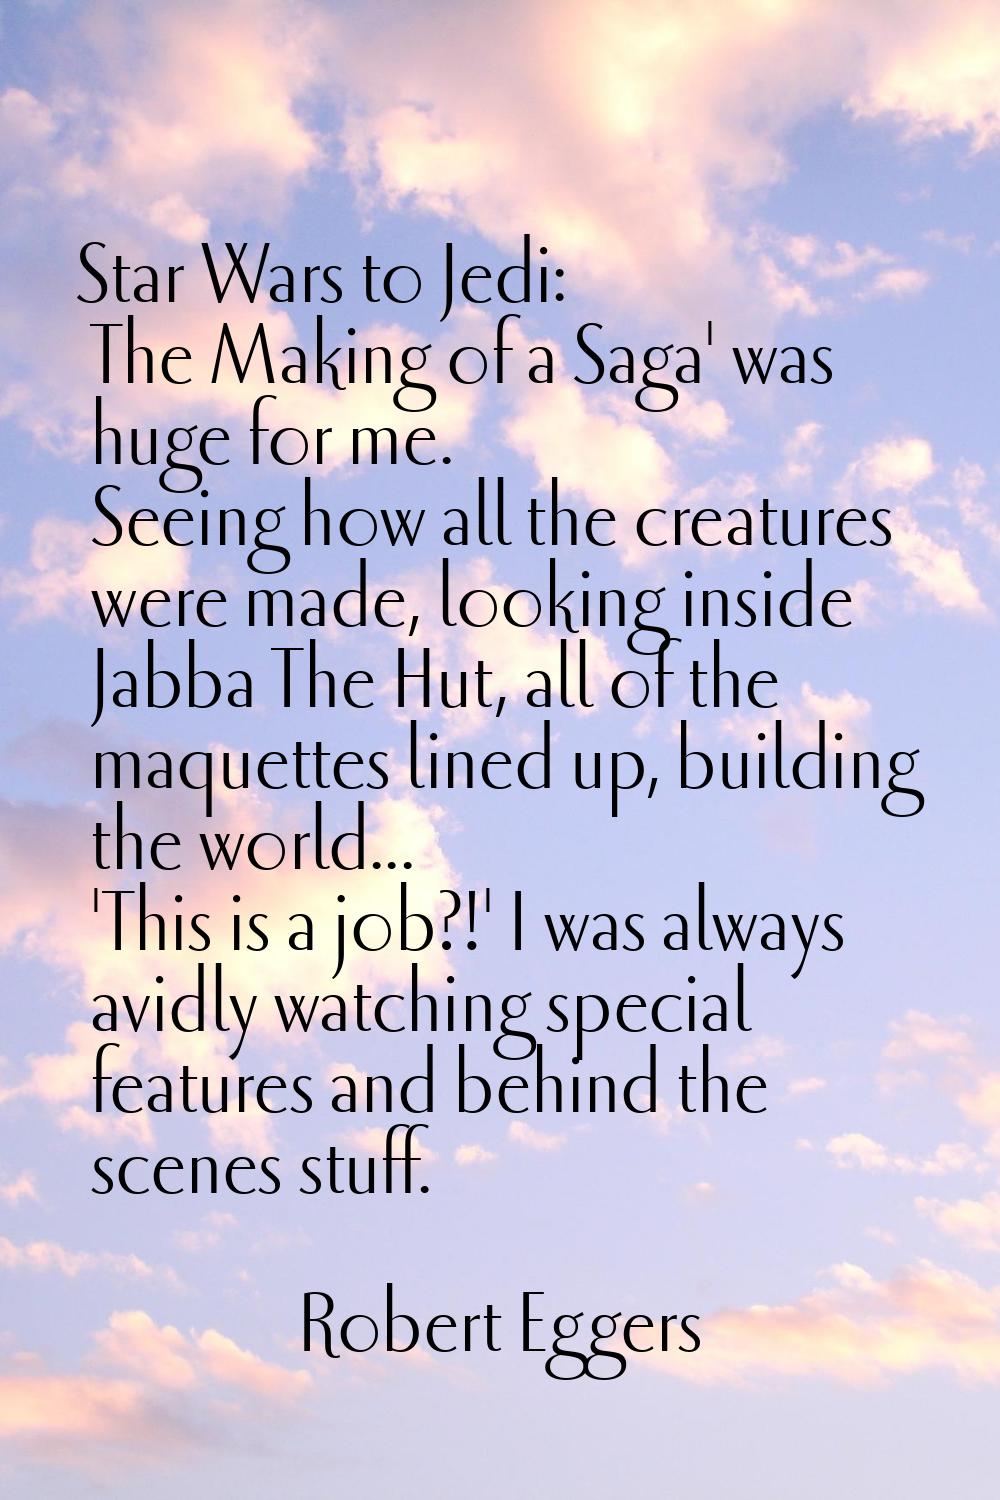 Star Wars to Jedi: The Making of a Saga' was huge for me. Seeing how all the creatures were made, l